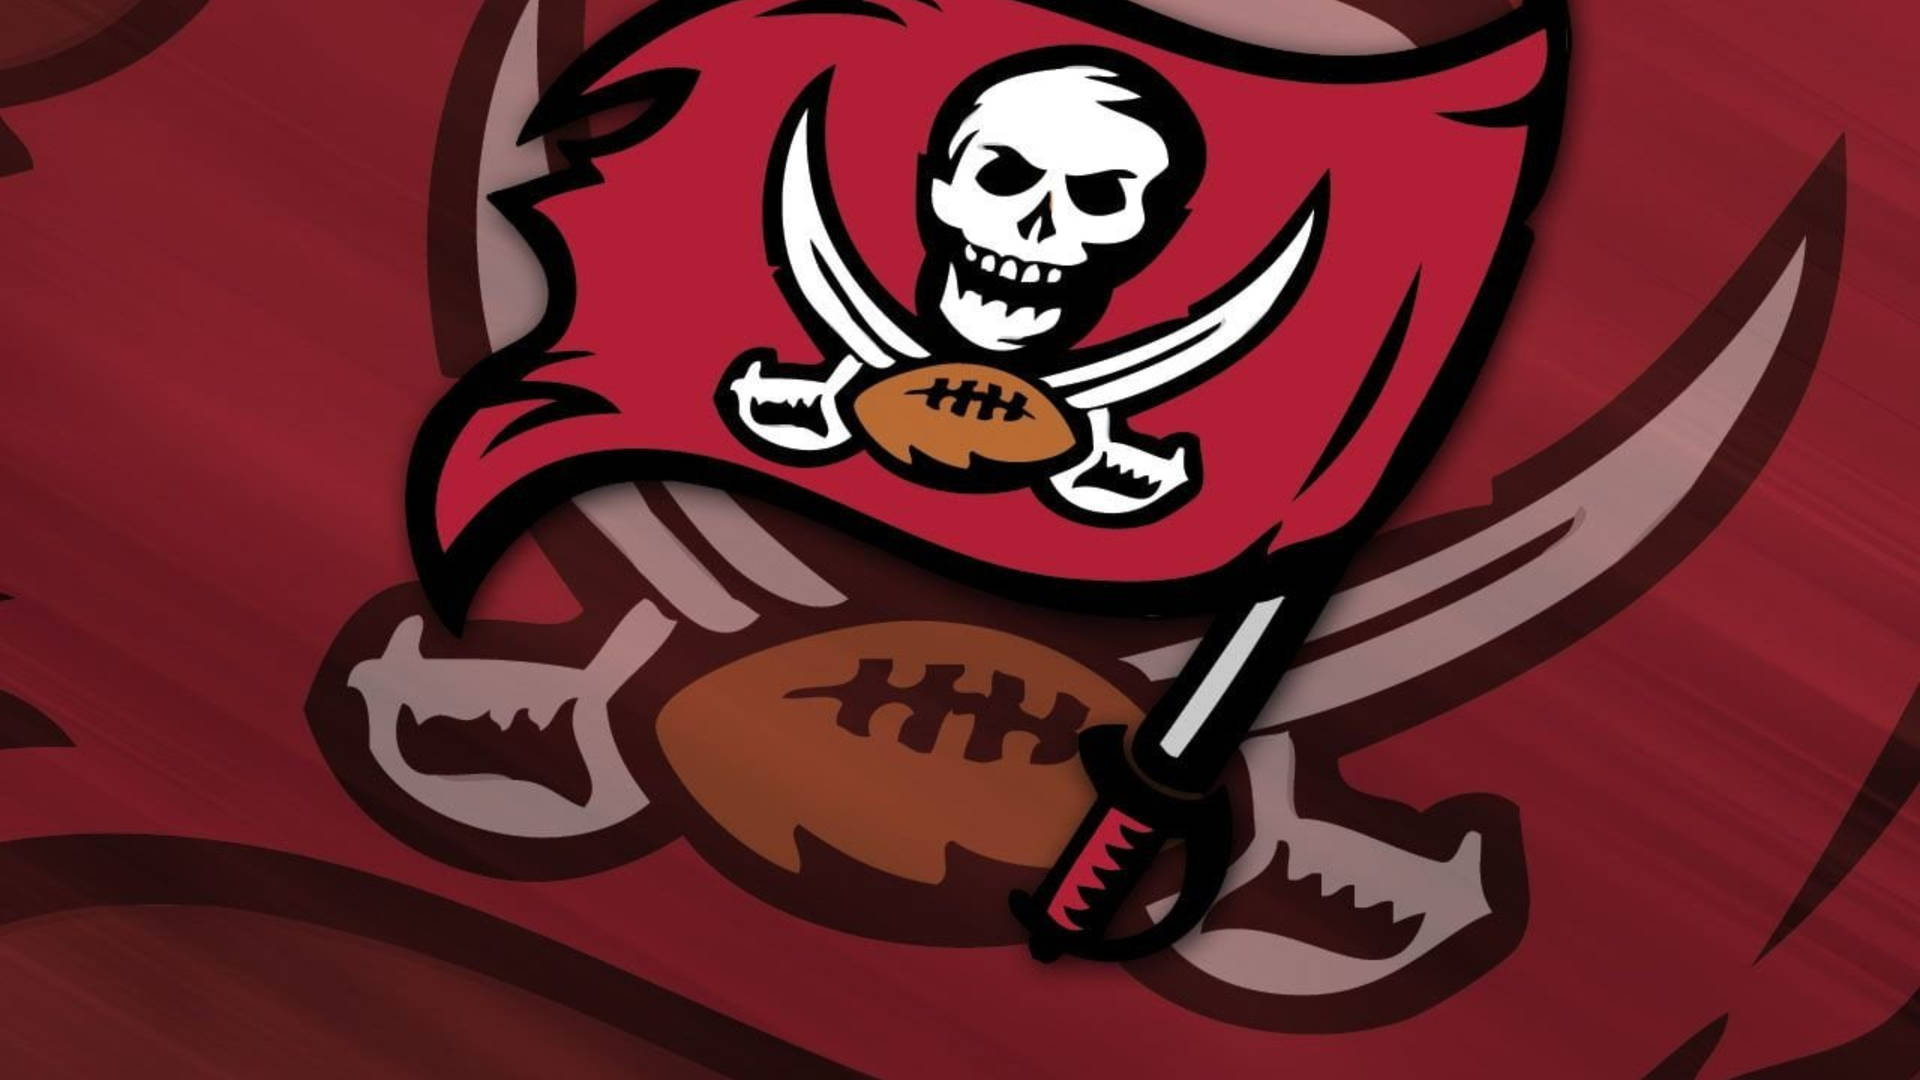 Tampa Bay Buccaneers 4096X2304 Wallpaper and Background Image